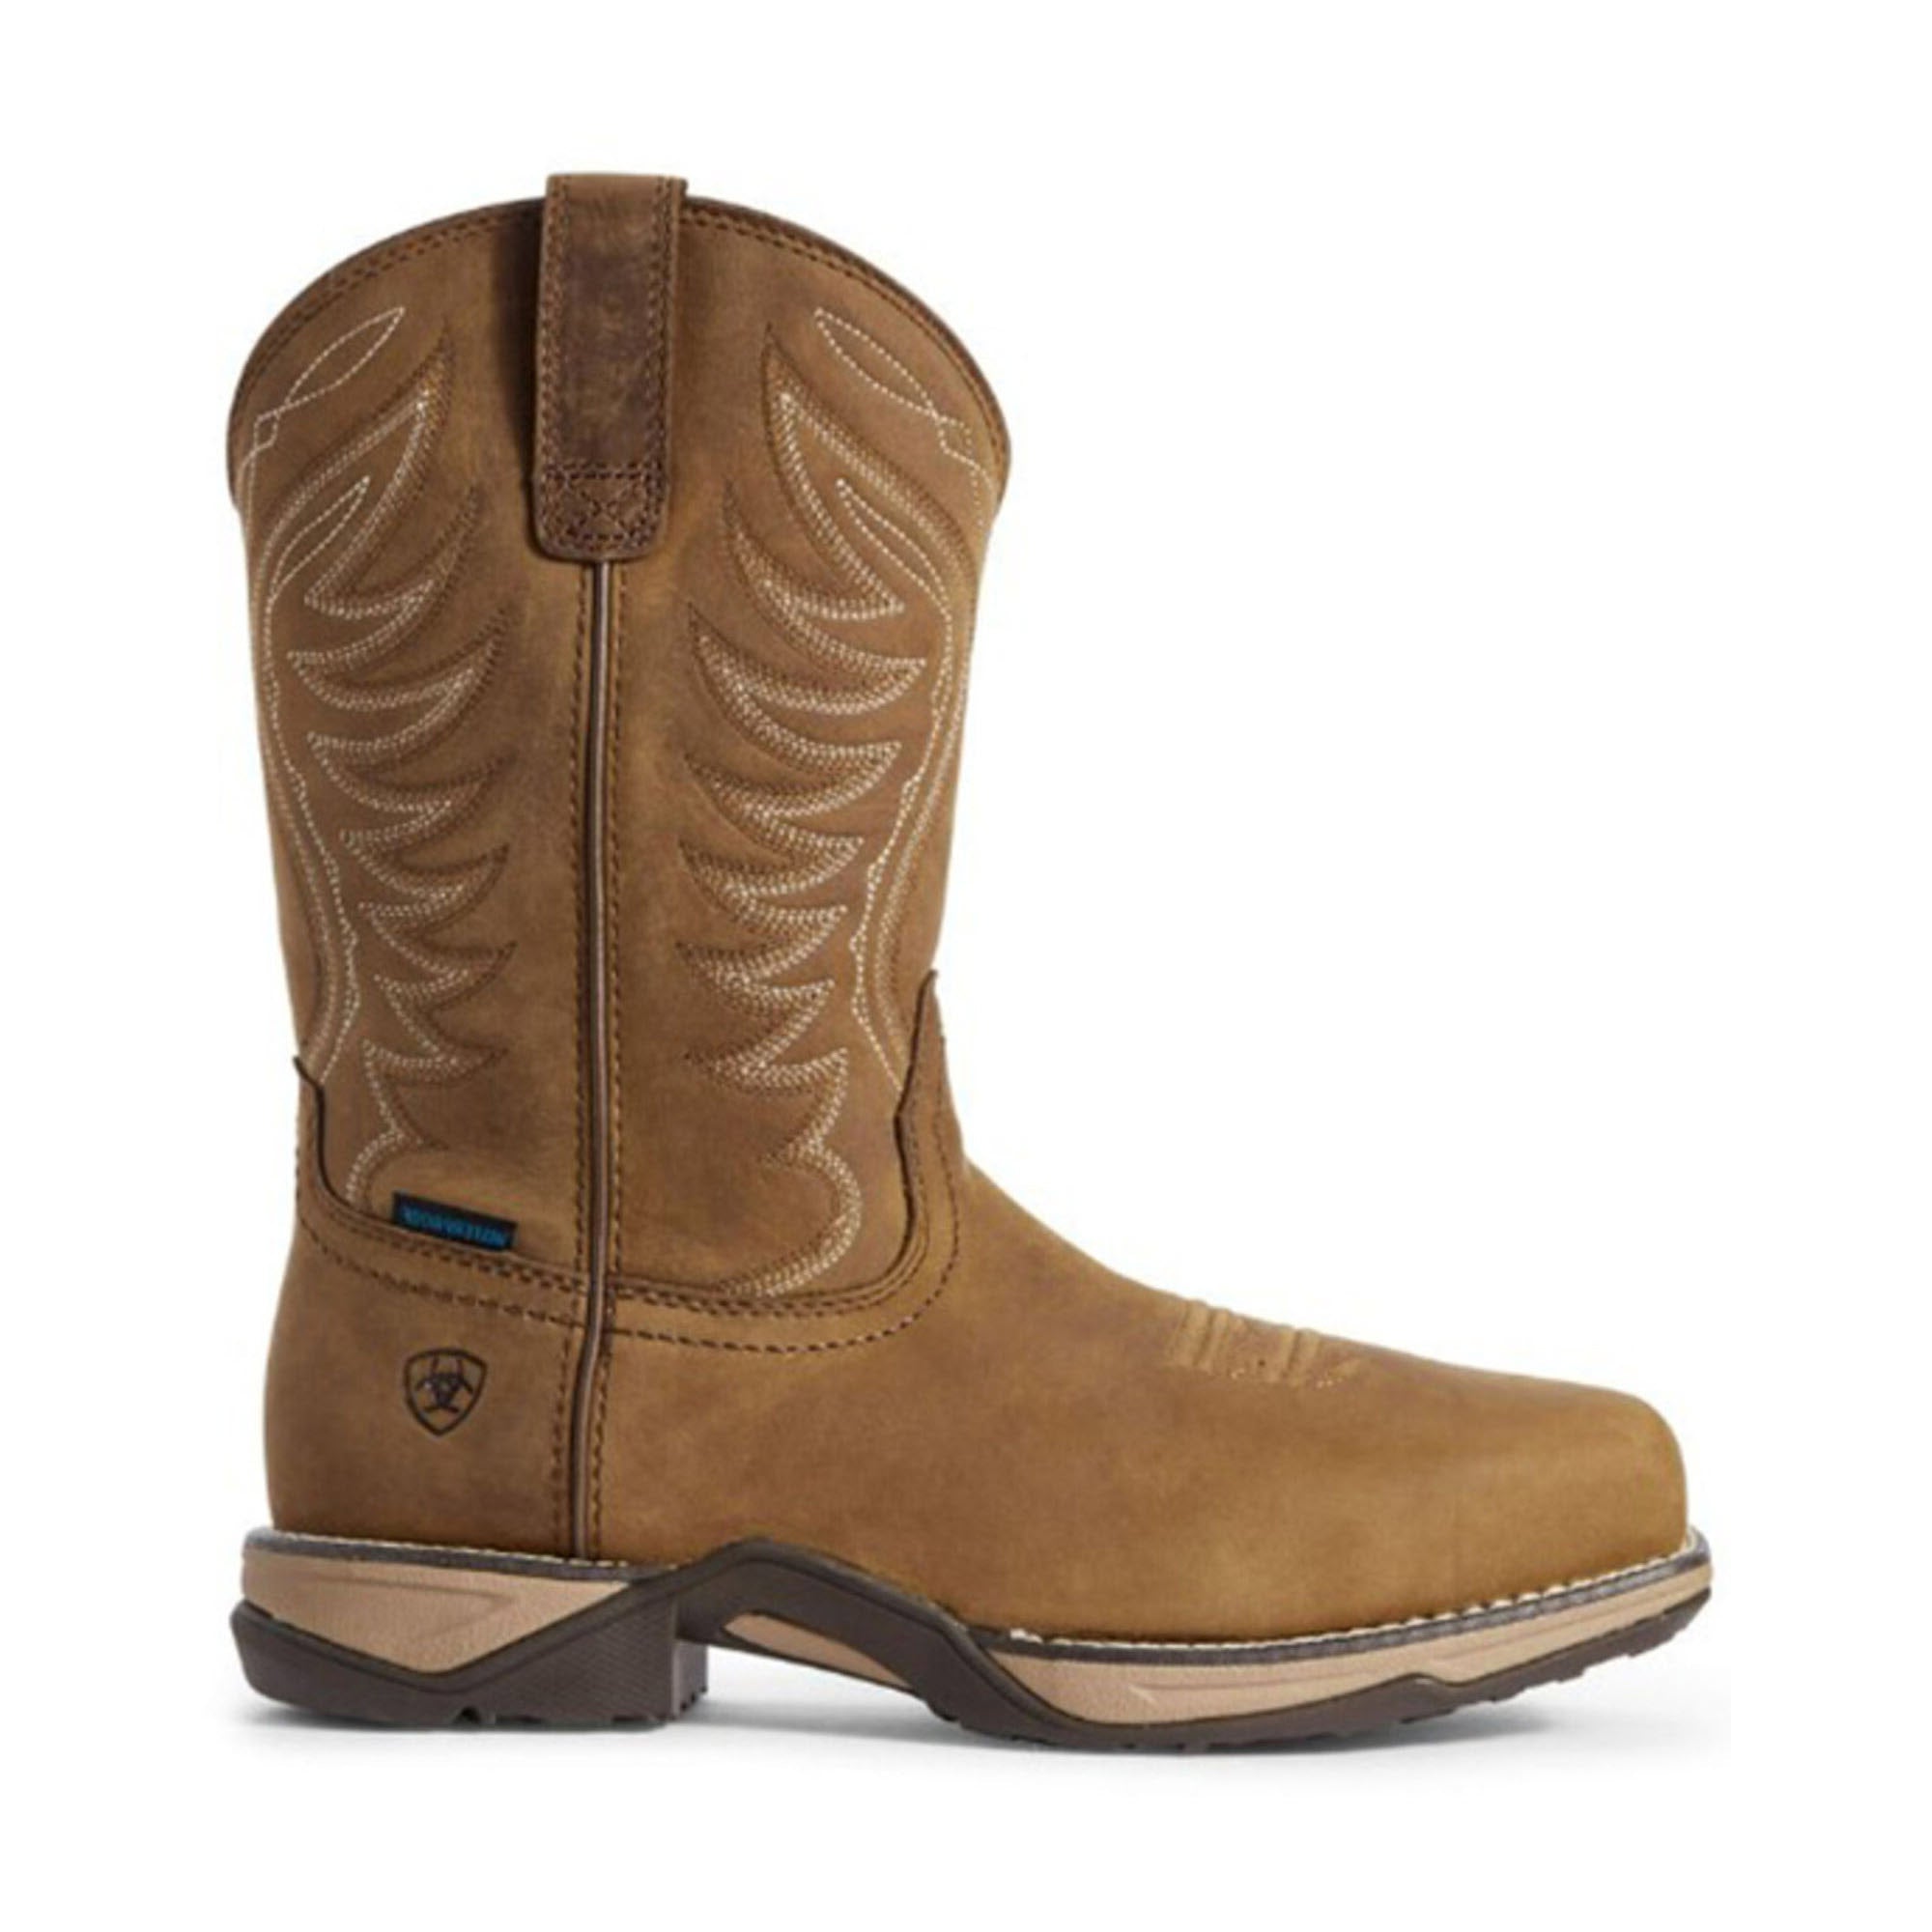 A Ariat brown leather cowboy boot with detailed stitching and a small logo on the side, featuring a waterproof DRYShield™ breathable construction, displayed against a white background.